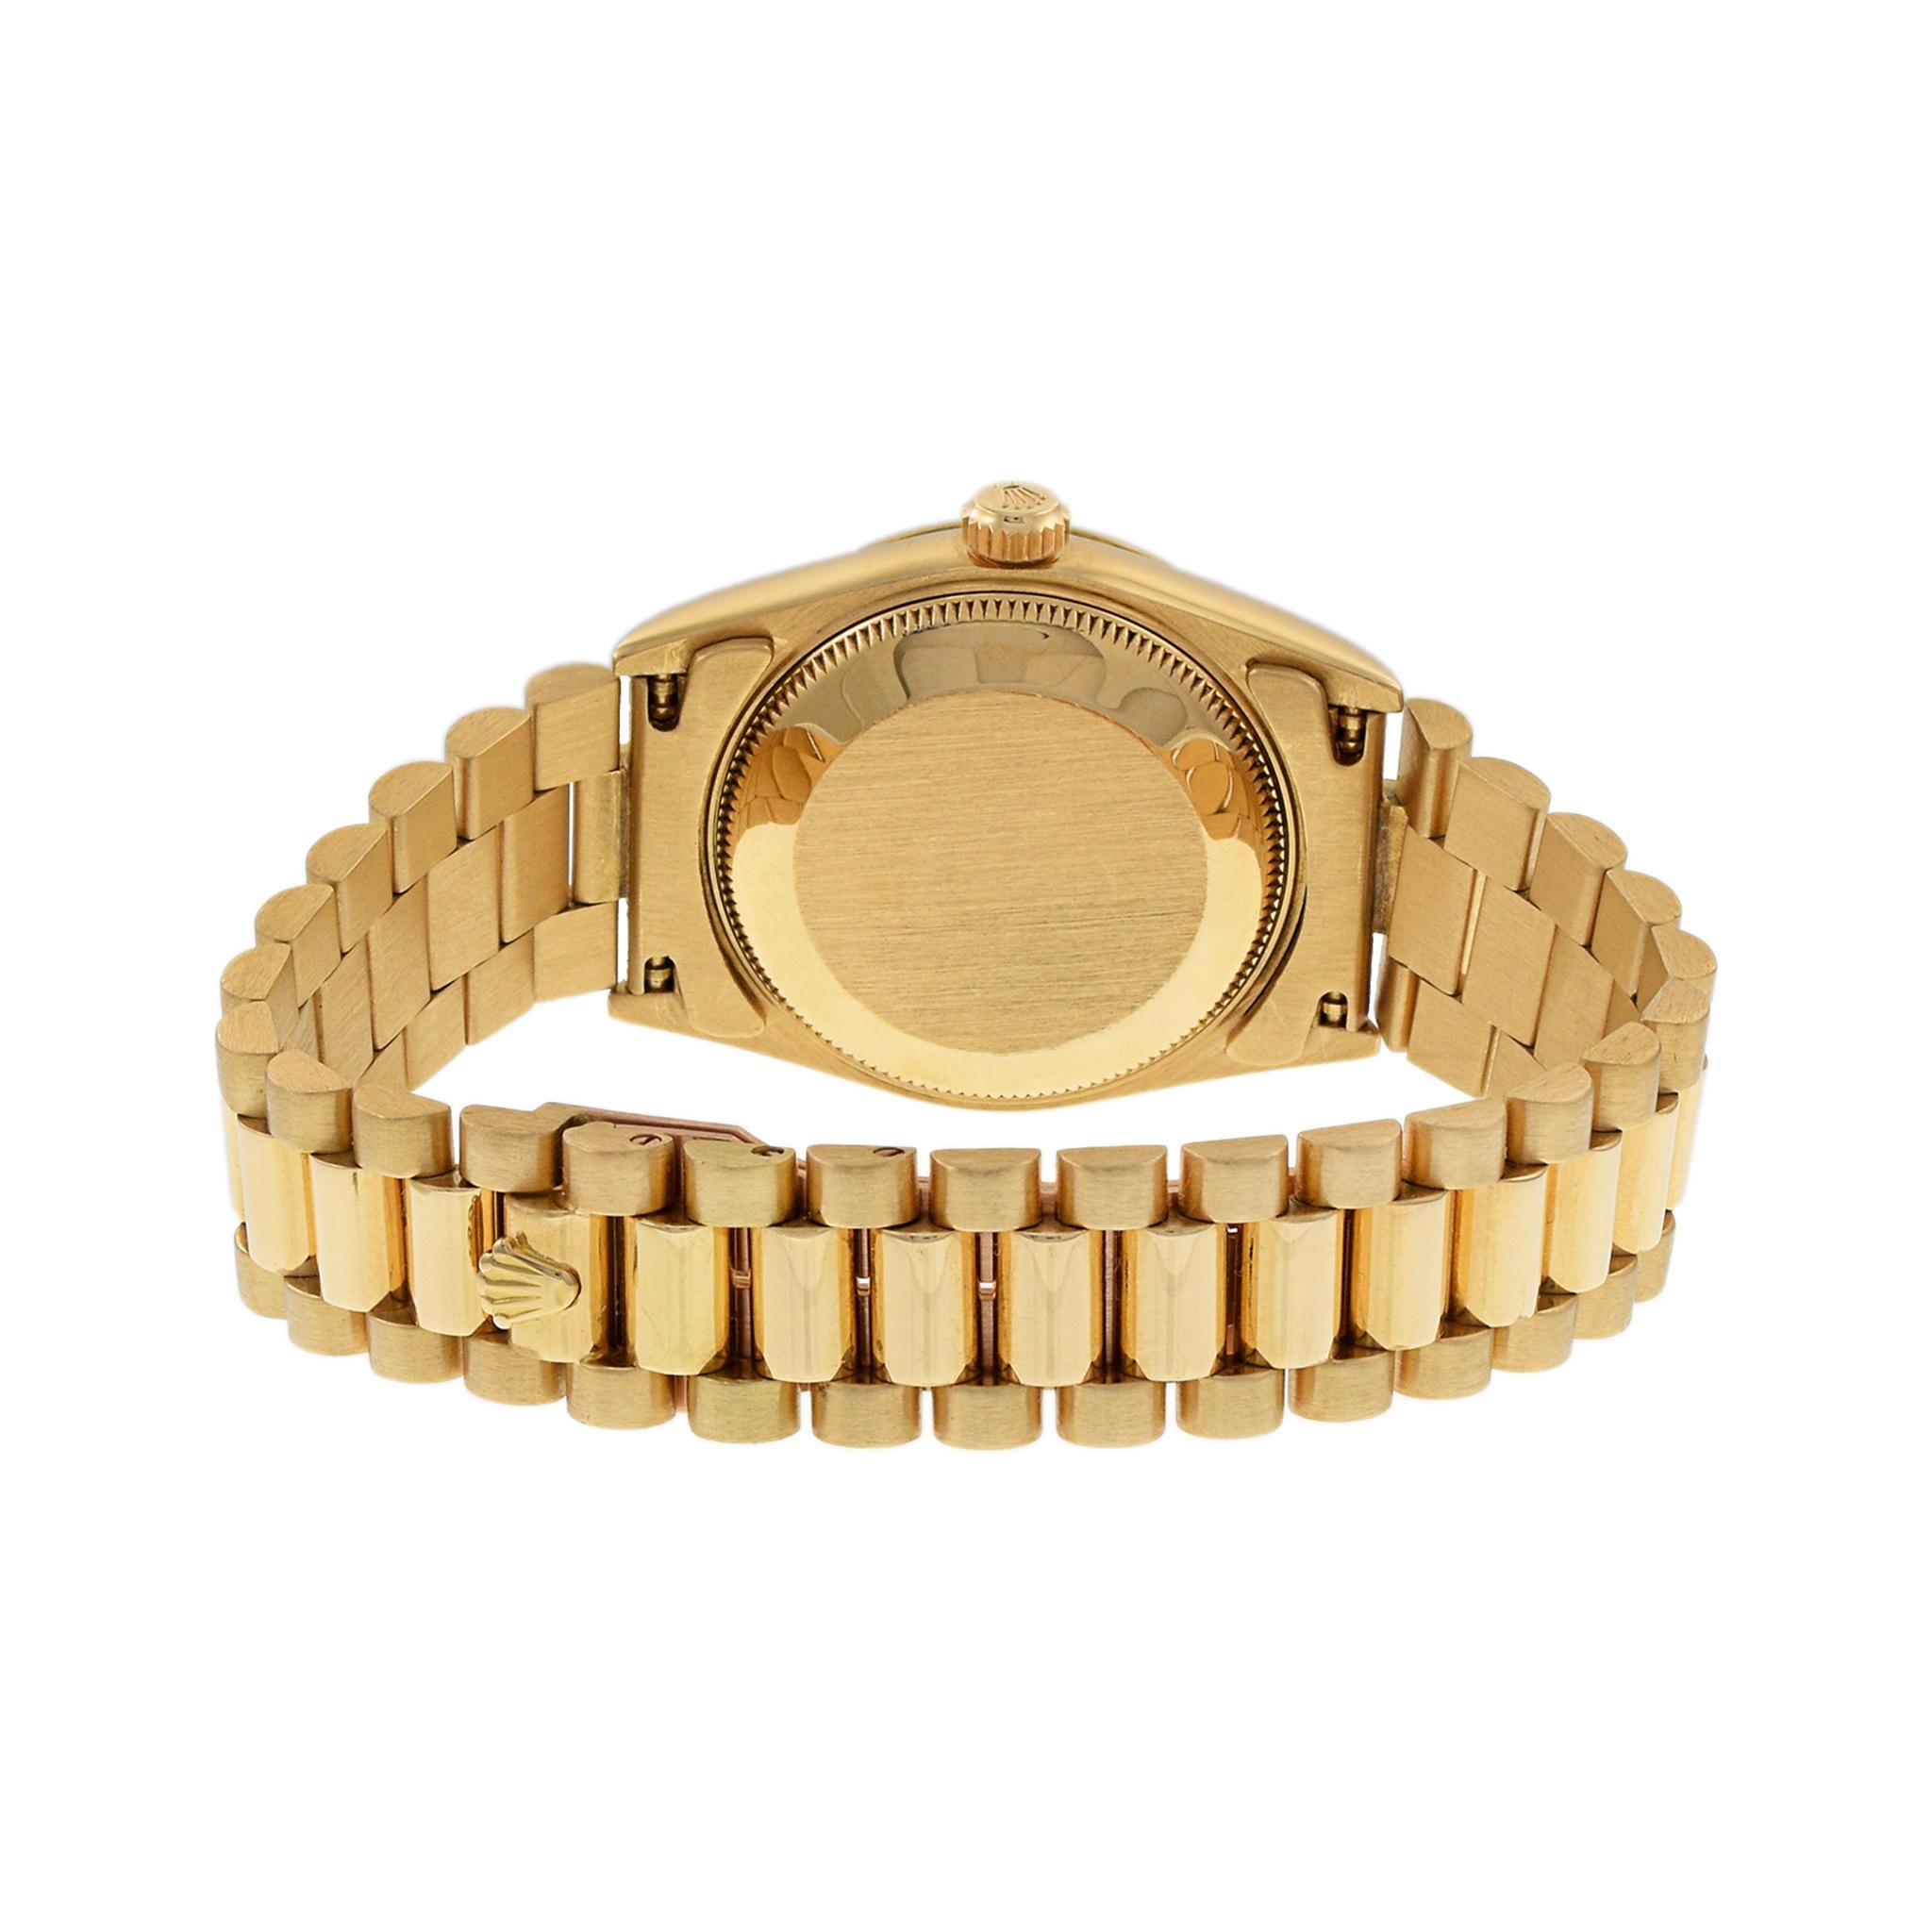 Women's or Men's Rolex Datejust 31 18K Yellow Gold with Diamonds